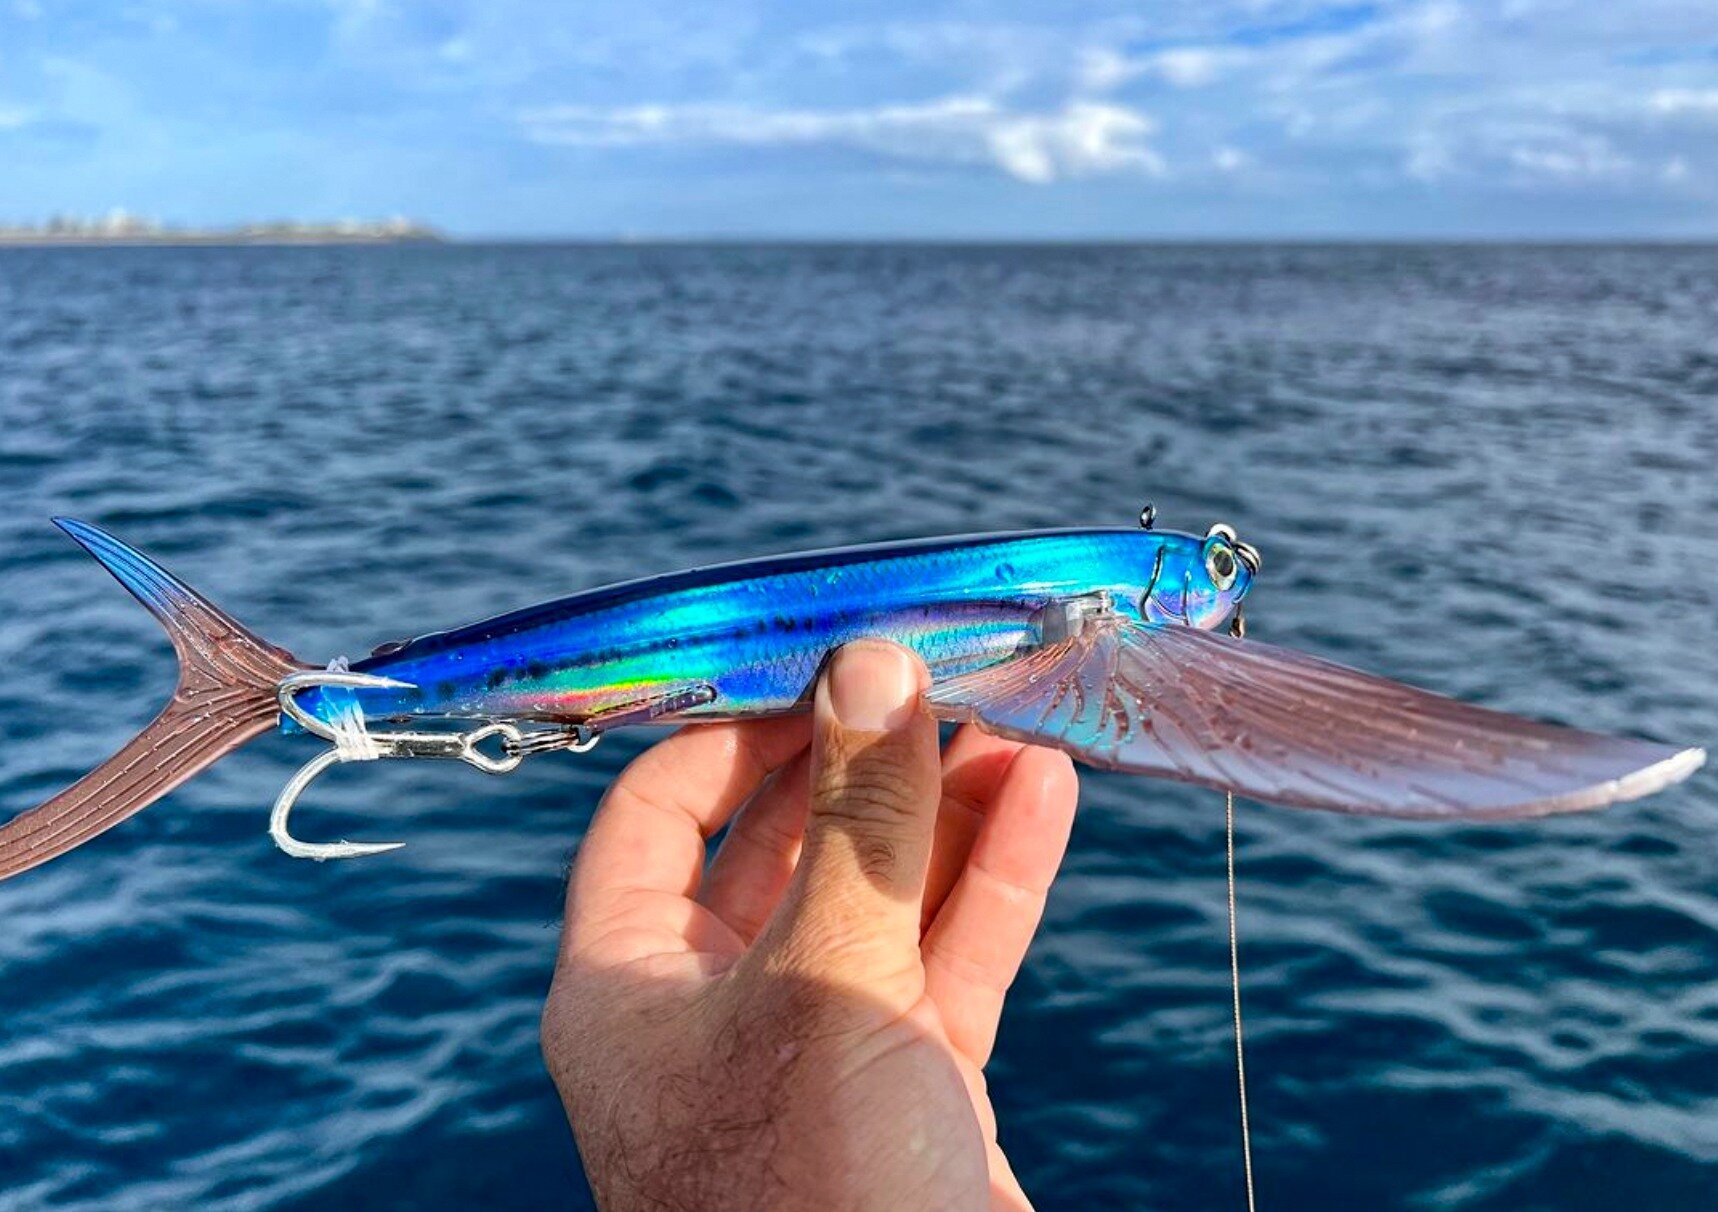 A variety of rigging options. A lure to target a variety of species. The SLIPSTREAM 200 delivers on the promise of being an essential option for any serious offshore angler.

#ndtacklenz #nomadlures #nzfishing #fishingnz